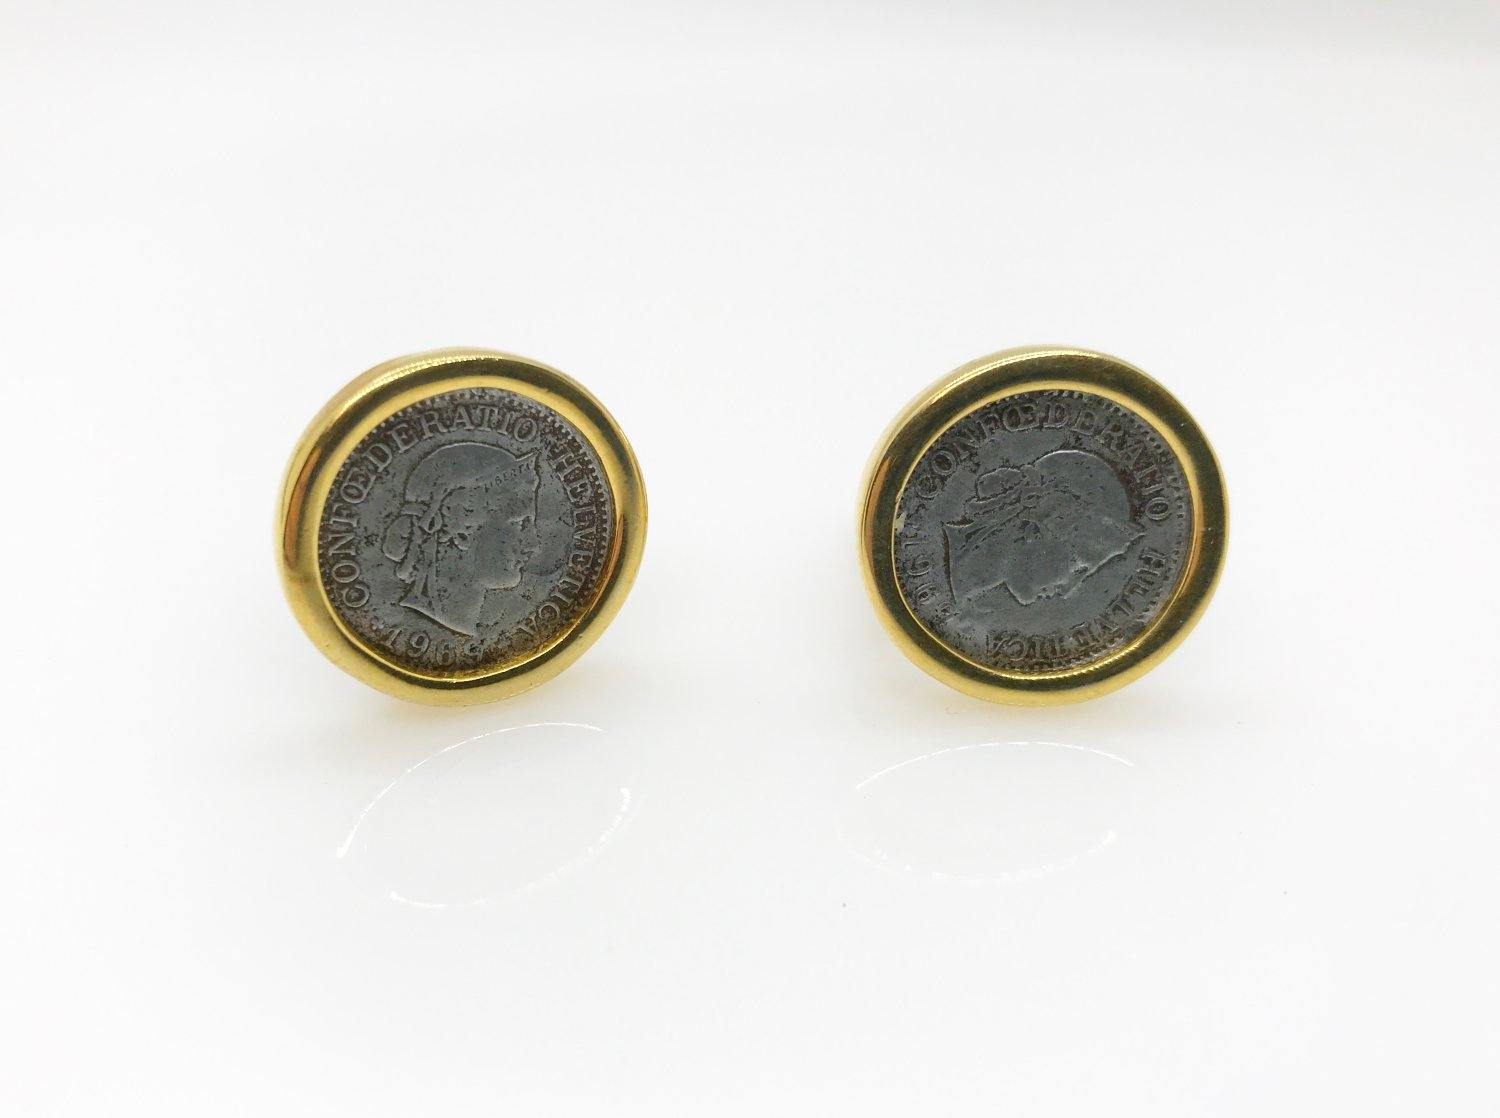 Confederation Helvetica 1969 Coin Earrings by Carolee - Lamoree’s Vintage